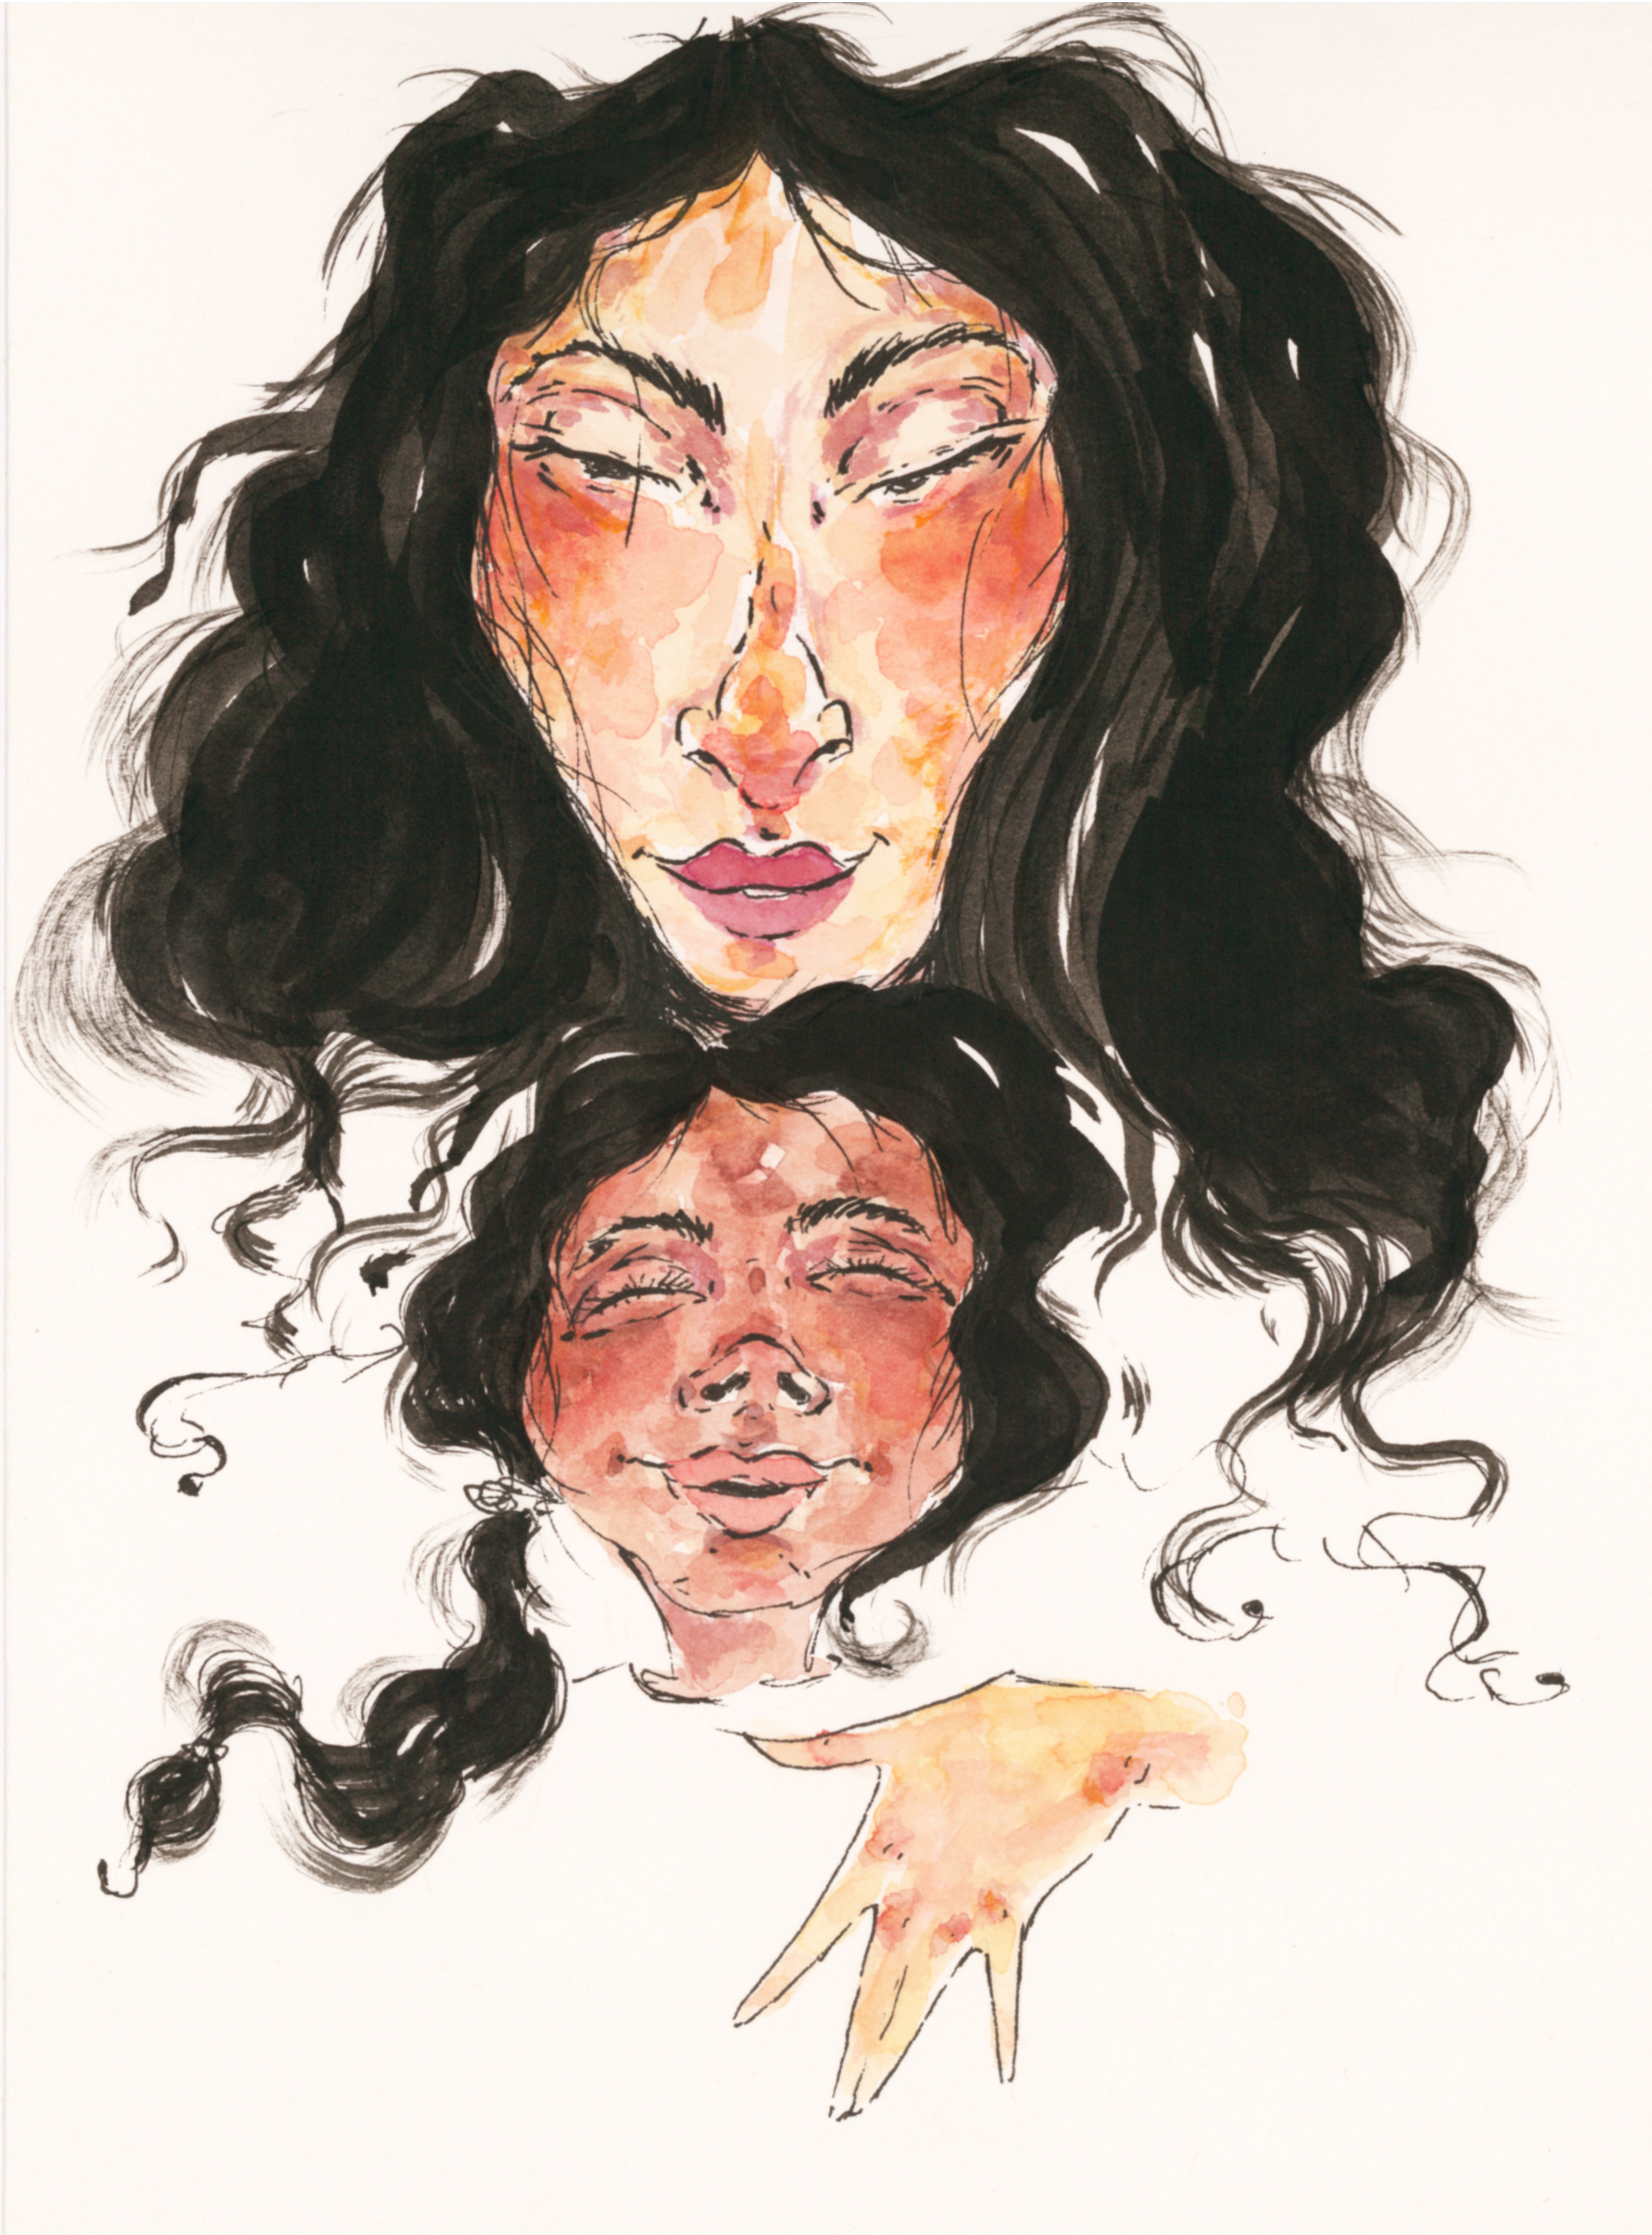 Learning to check my light-skinned privilege for my dark-skinned daughter